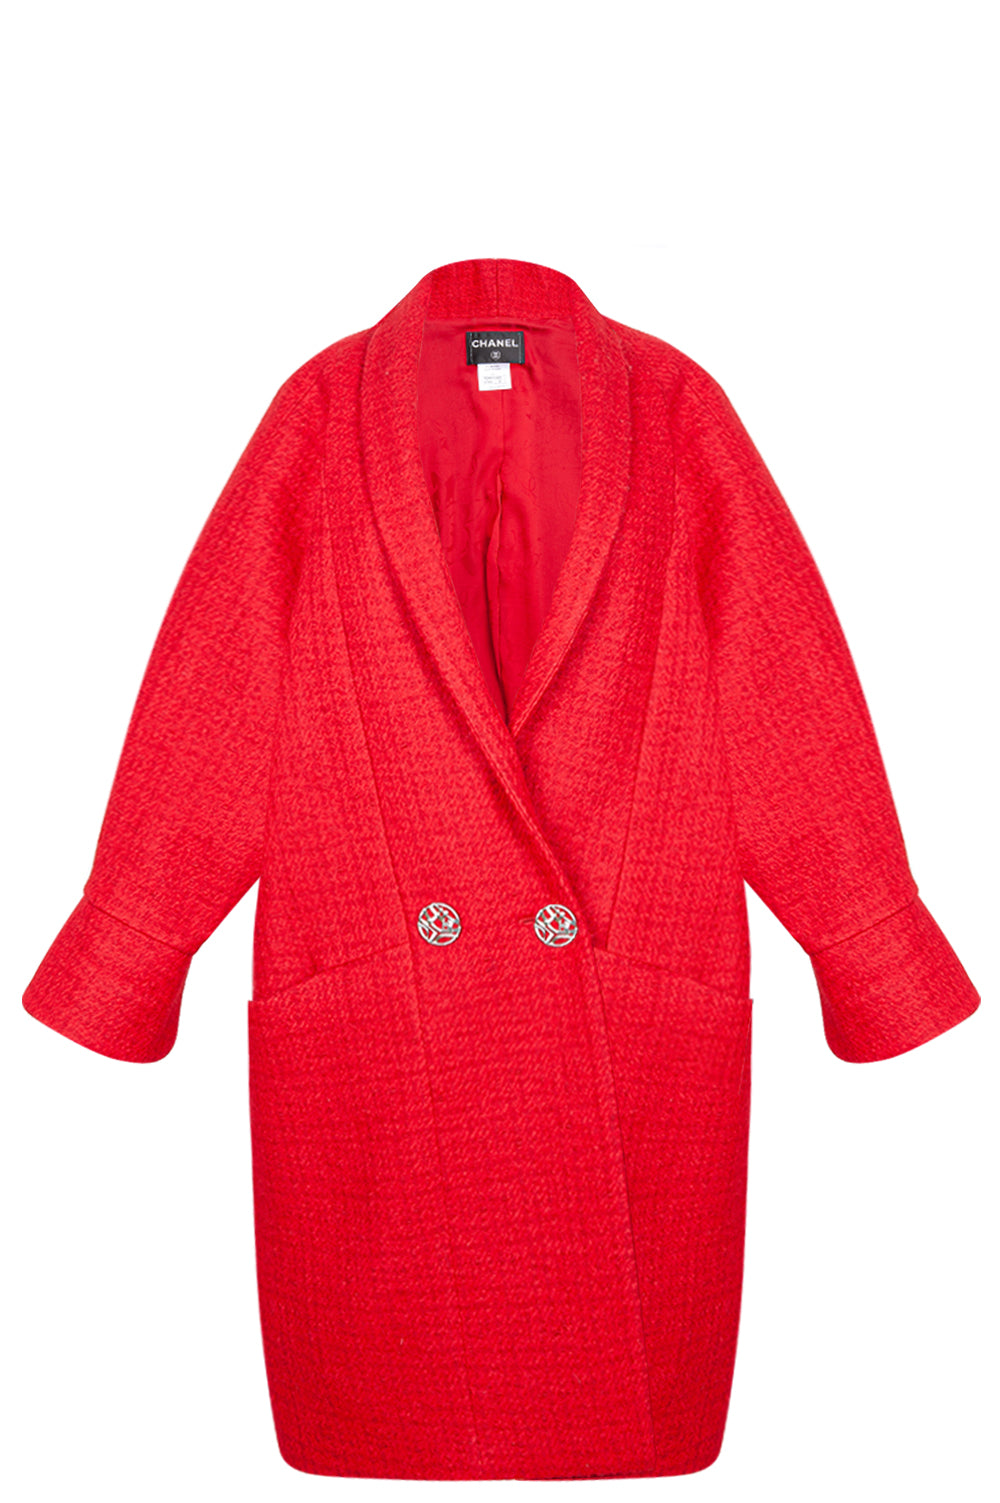 Chanel Tweed Coat Red Pre Fall 2009 